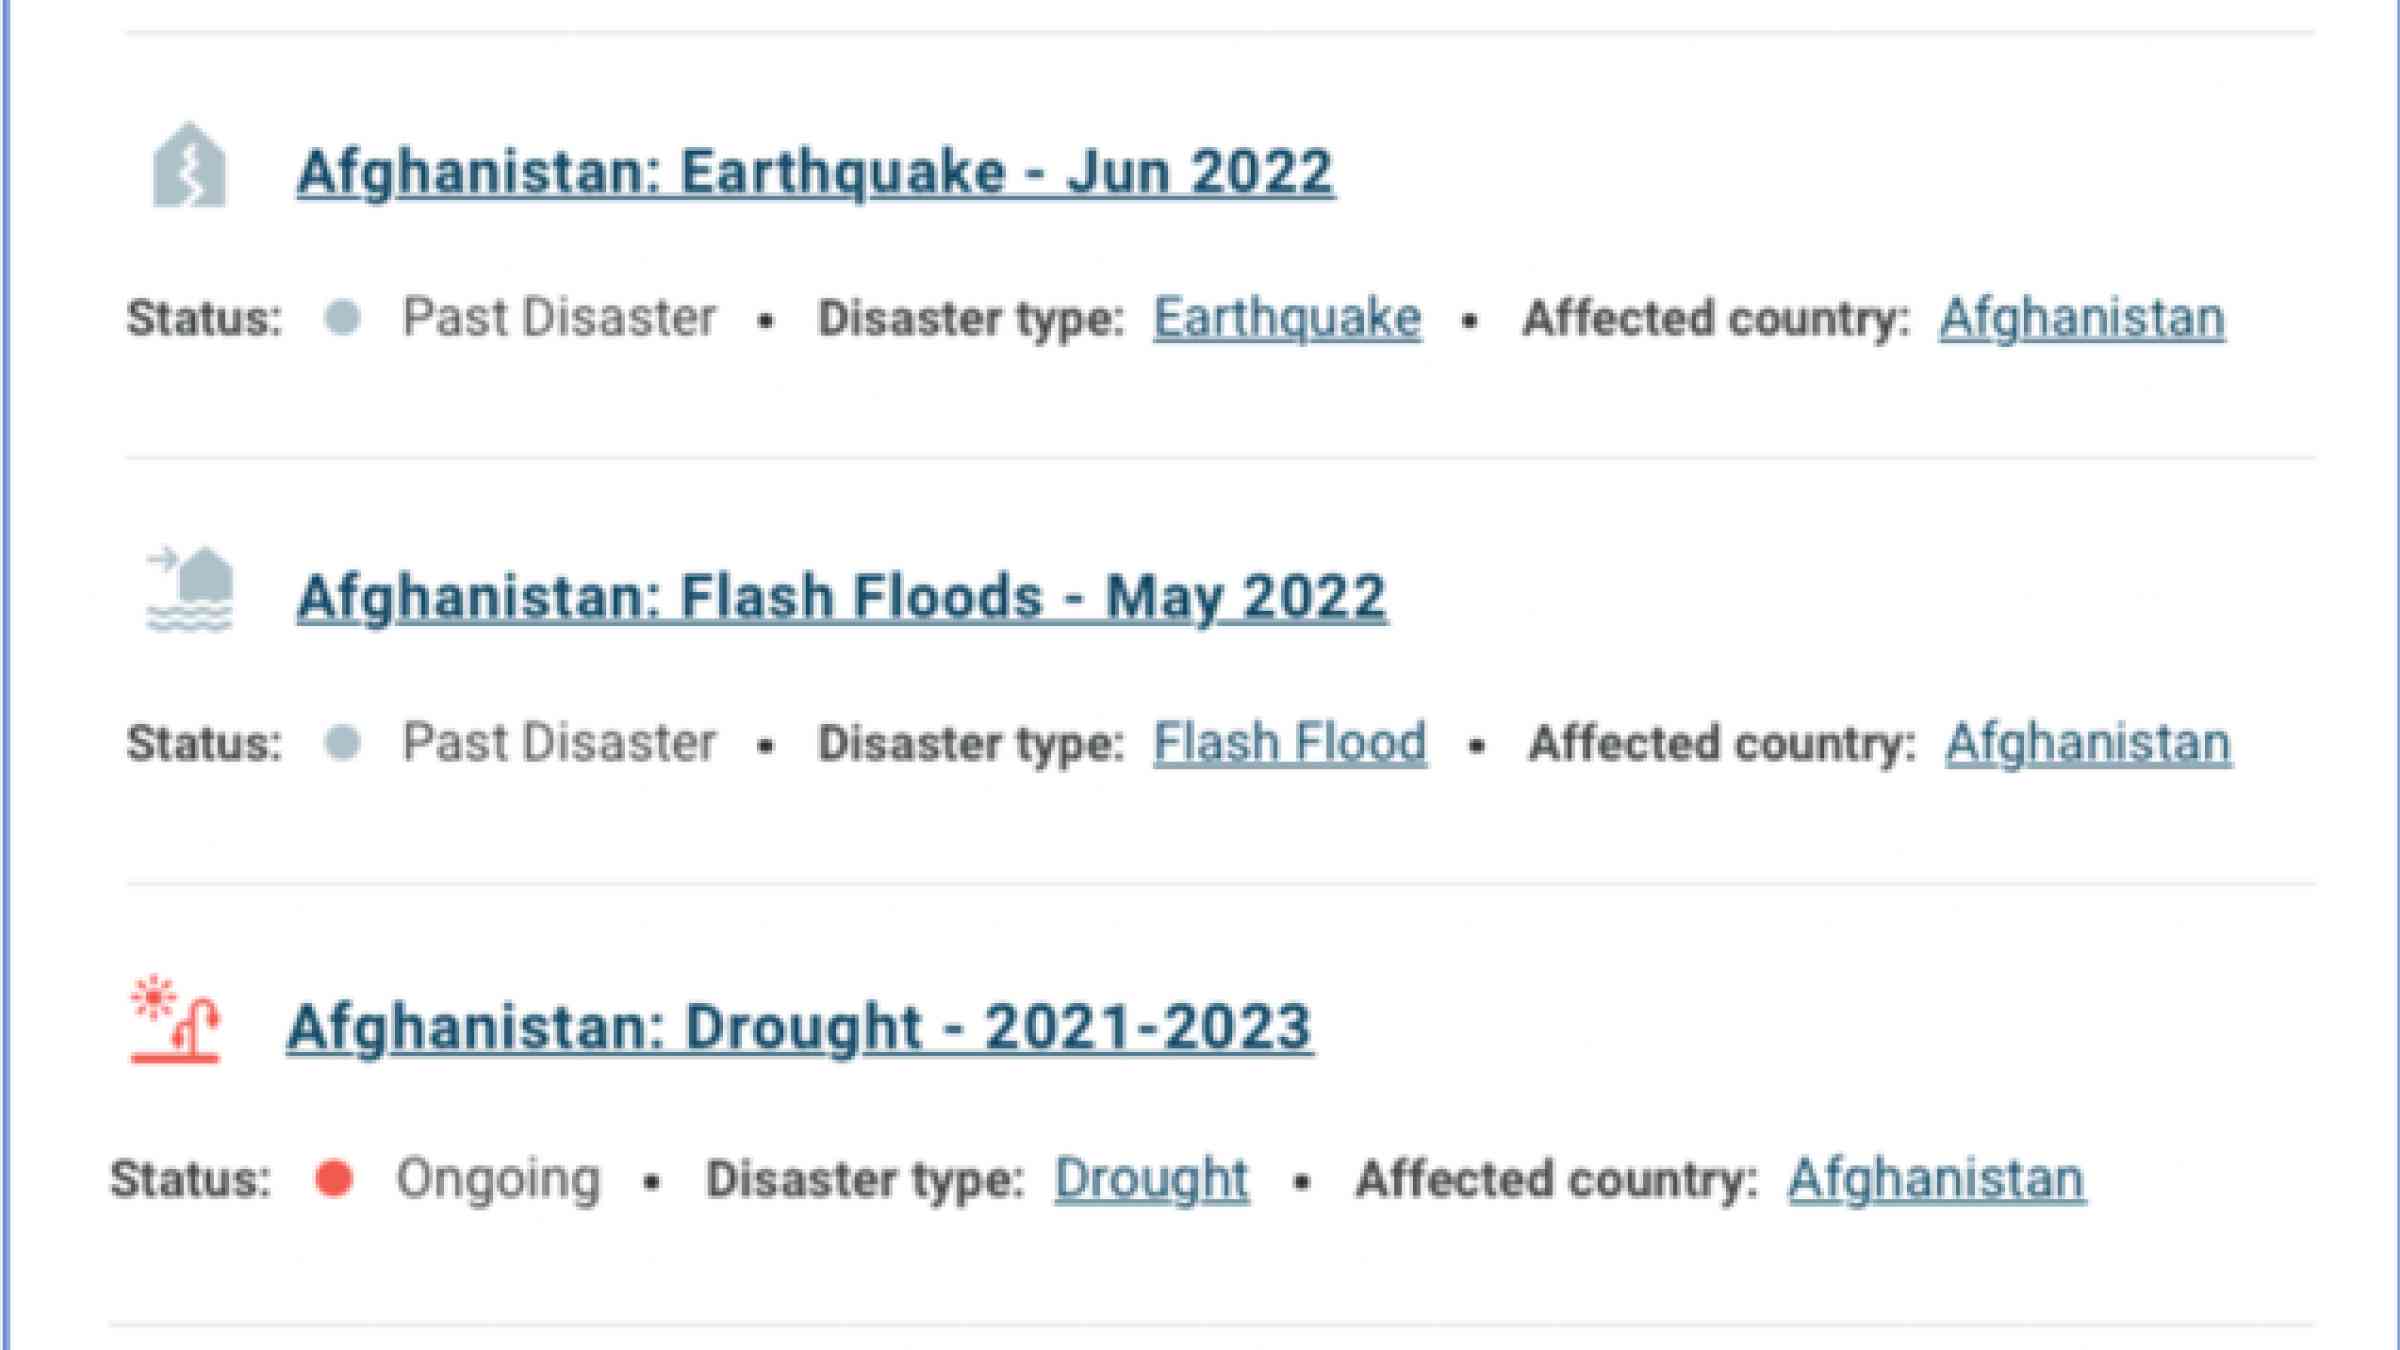 A snapshot of the disasters as reported by ReliefWeb on their website for Afghanistan mid- and end-2022